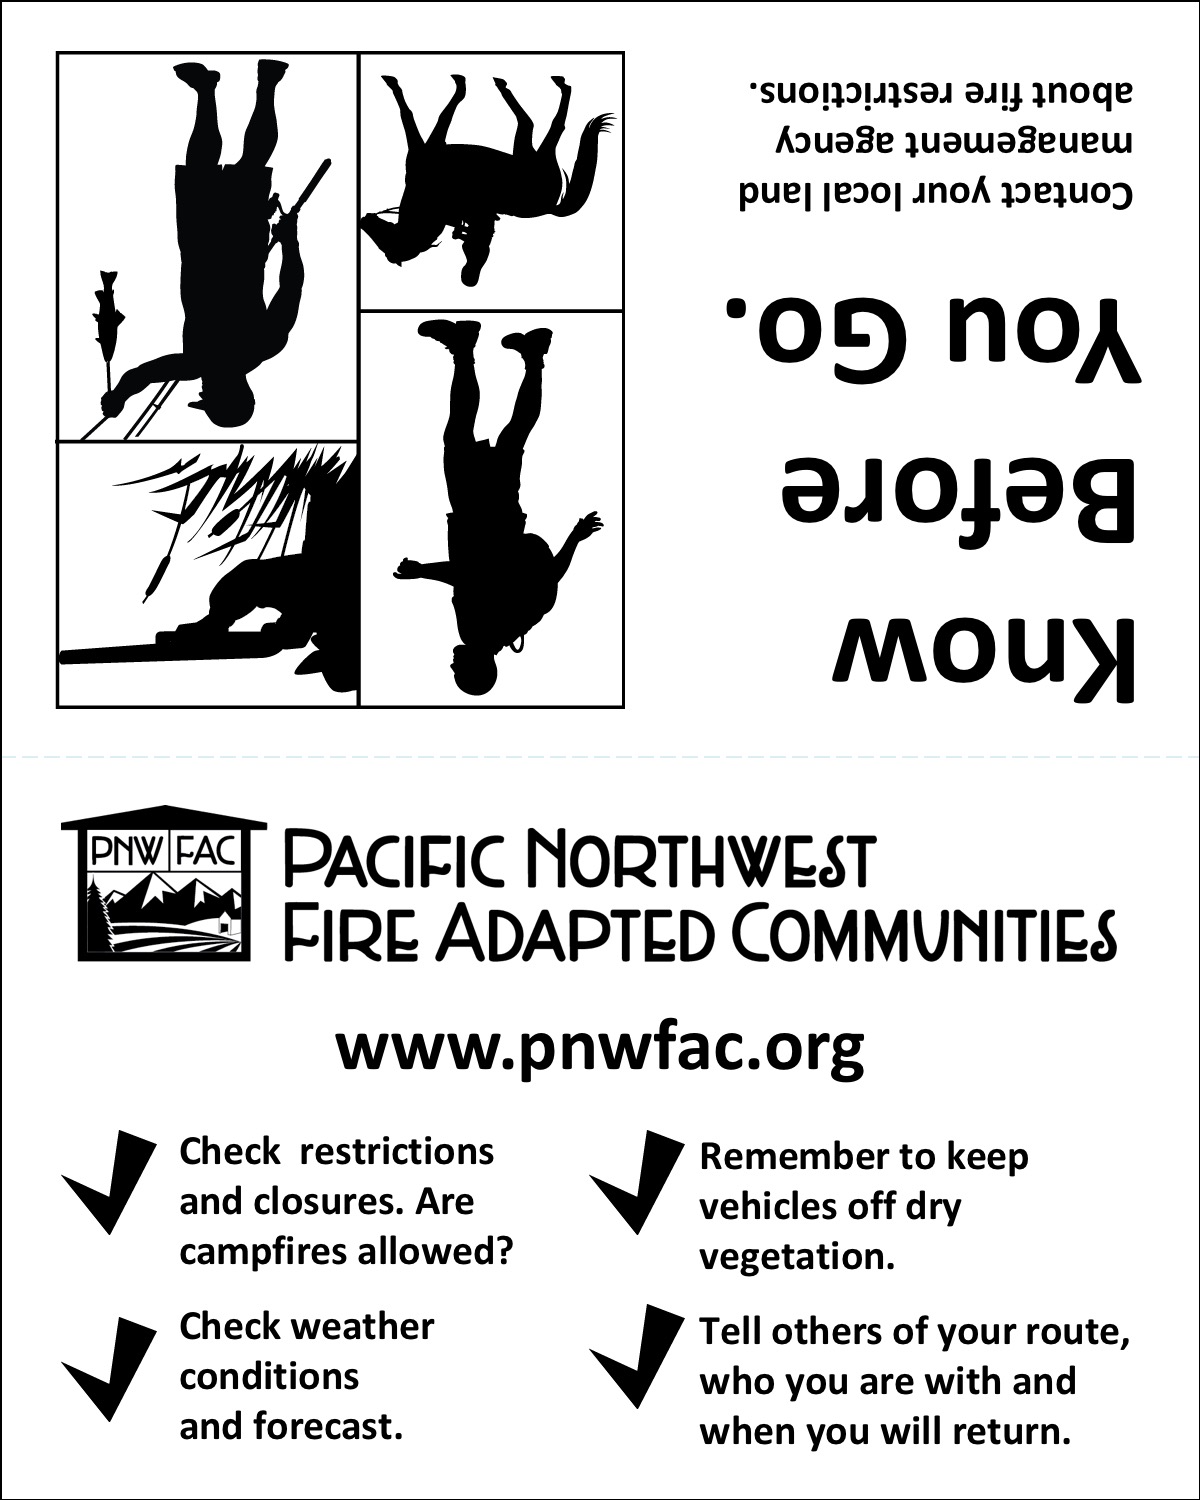 Know Before You Go. Illustration of figures hunting, hiking, fishing and biking. PNWFAC logo. Contact your local land management agency about fire restrictions.   Check  restrictions and closures. Are campfires allowed? Check weather conditions and forecast. Remember to keep vehicles off dry vegetation. Tell others of your route, who you are with and when you will return.